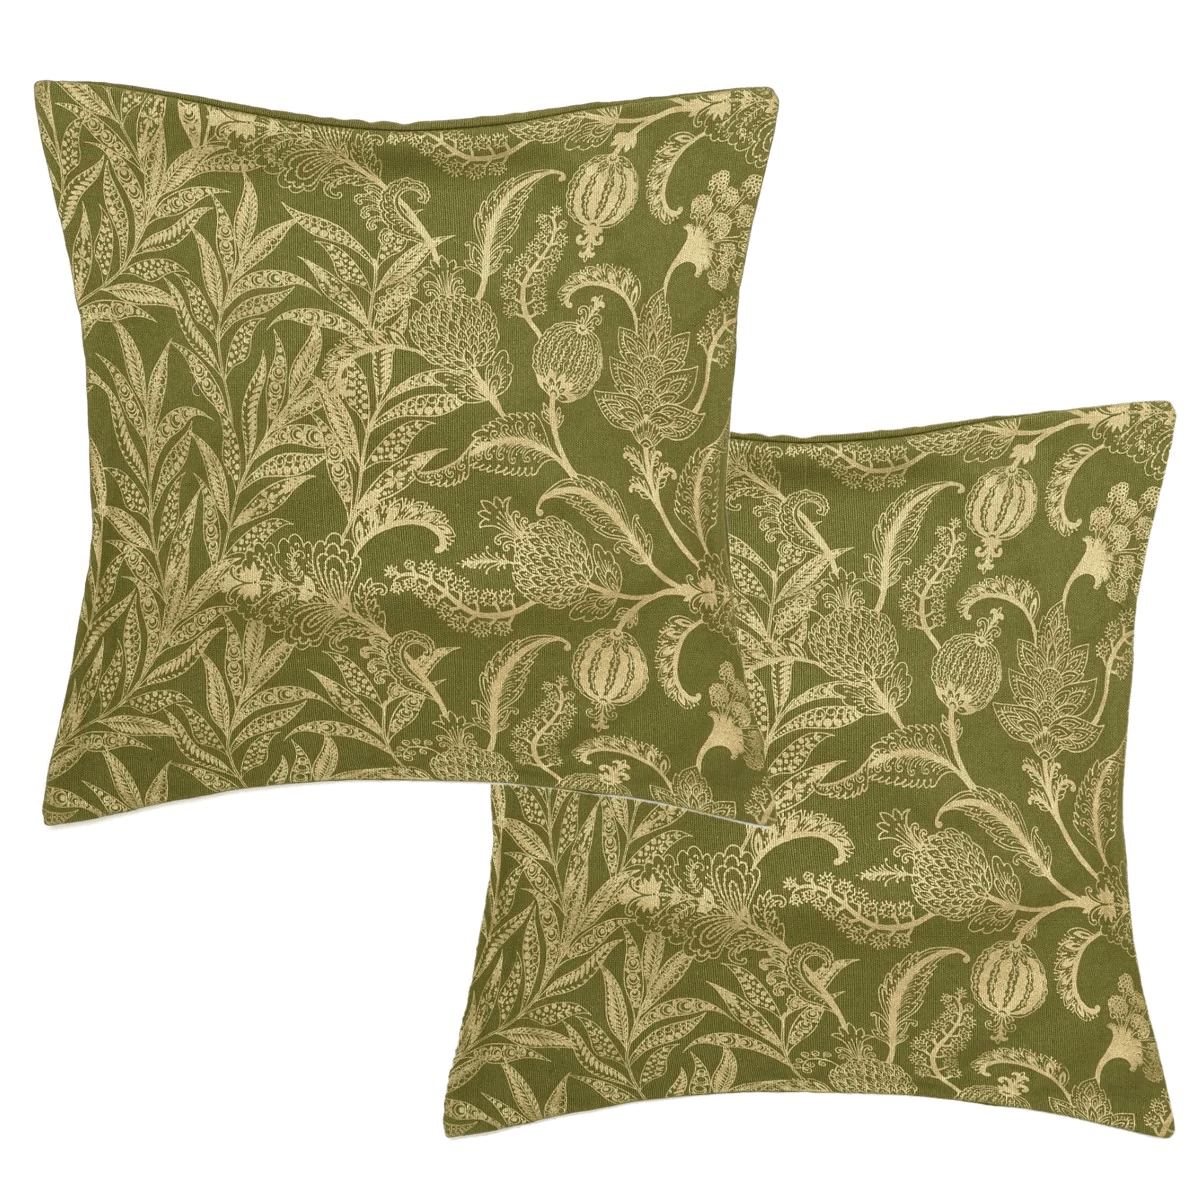 2 Pcs Olive Green Gold Jaal Cushion Cover 18x18"